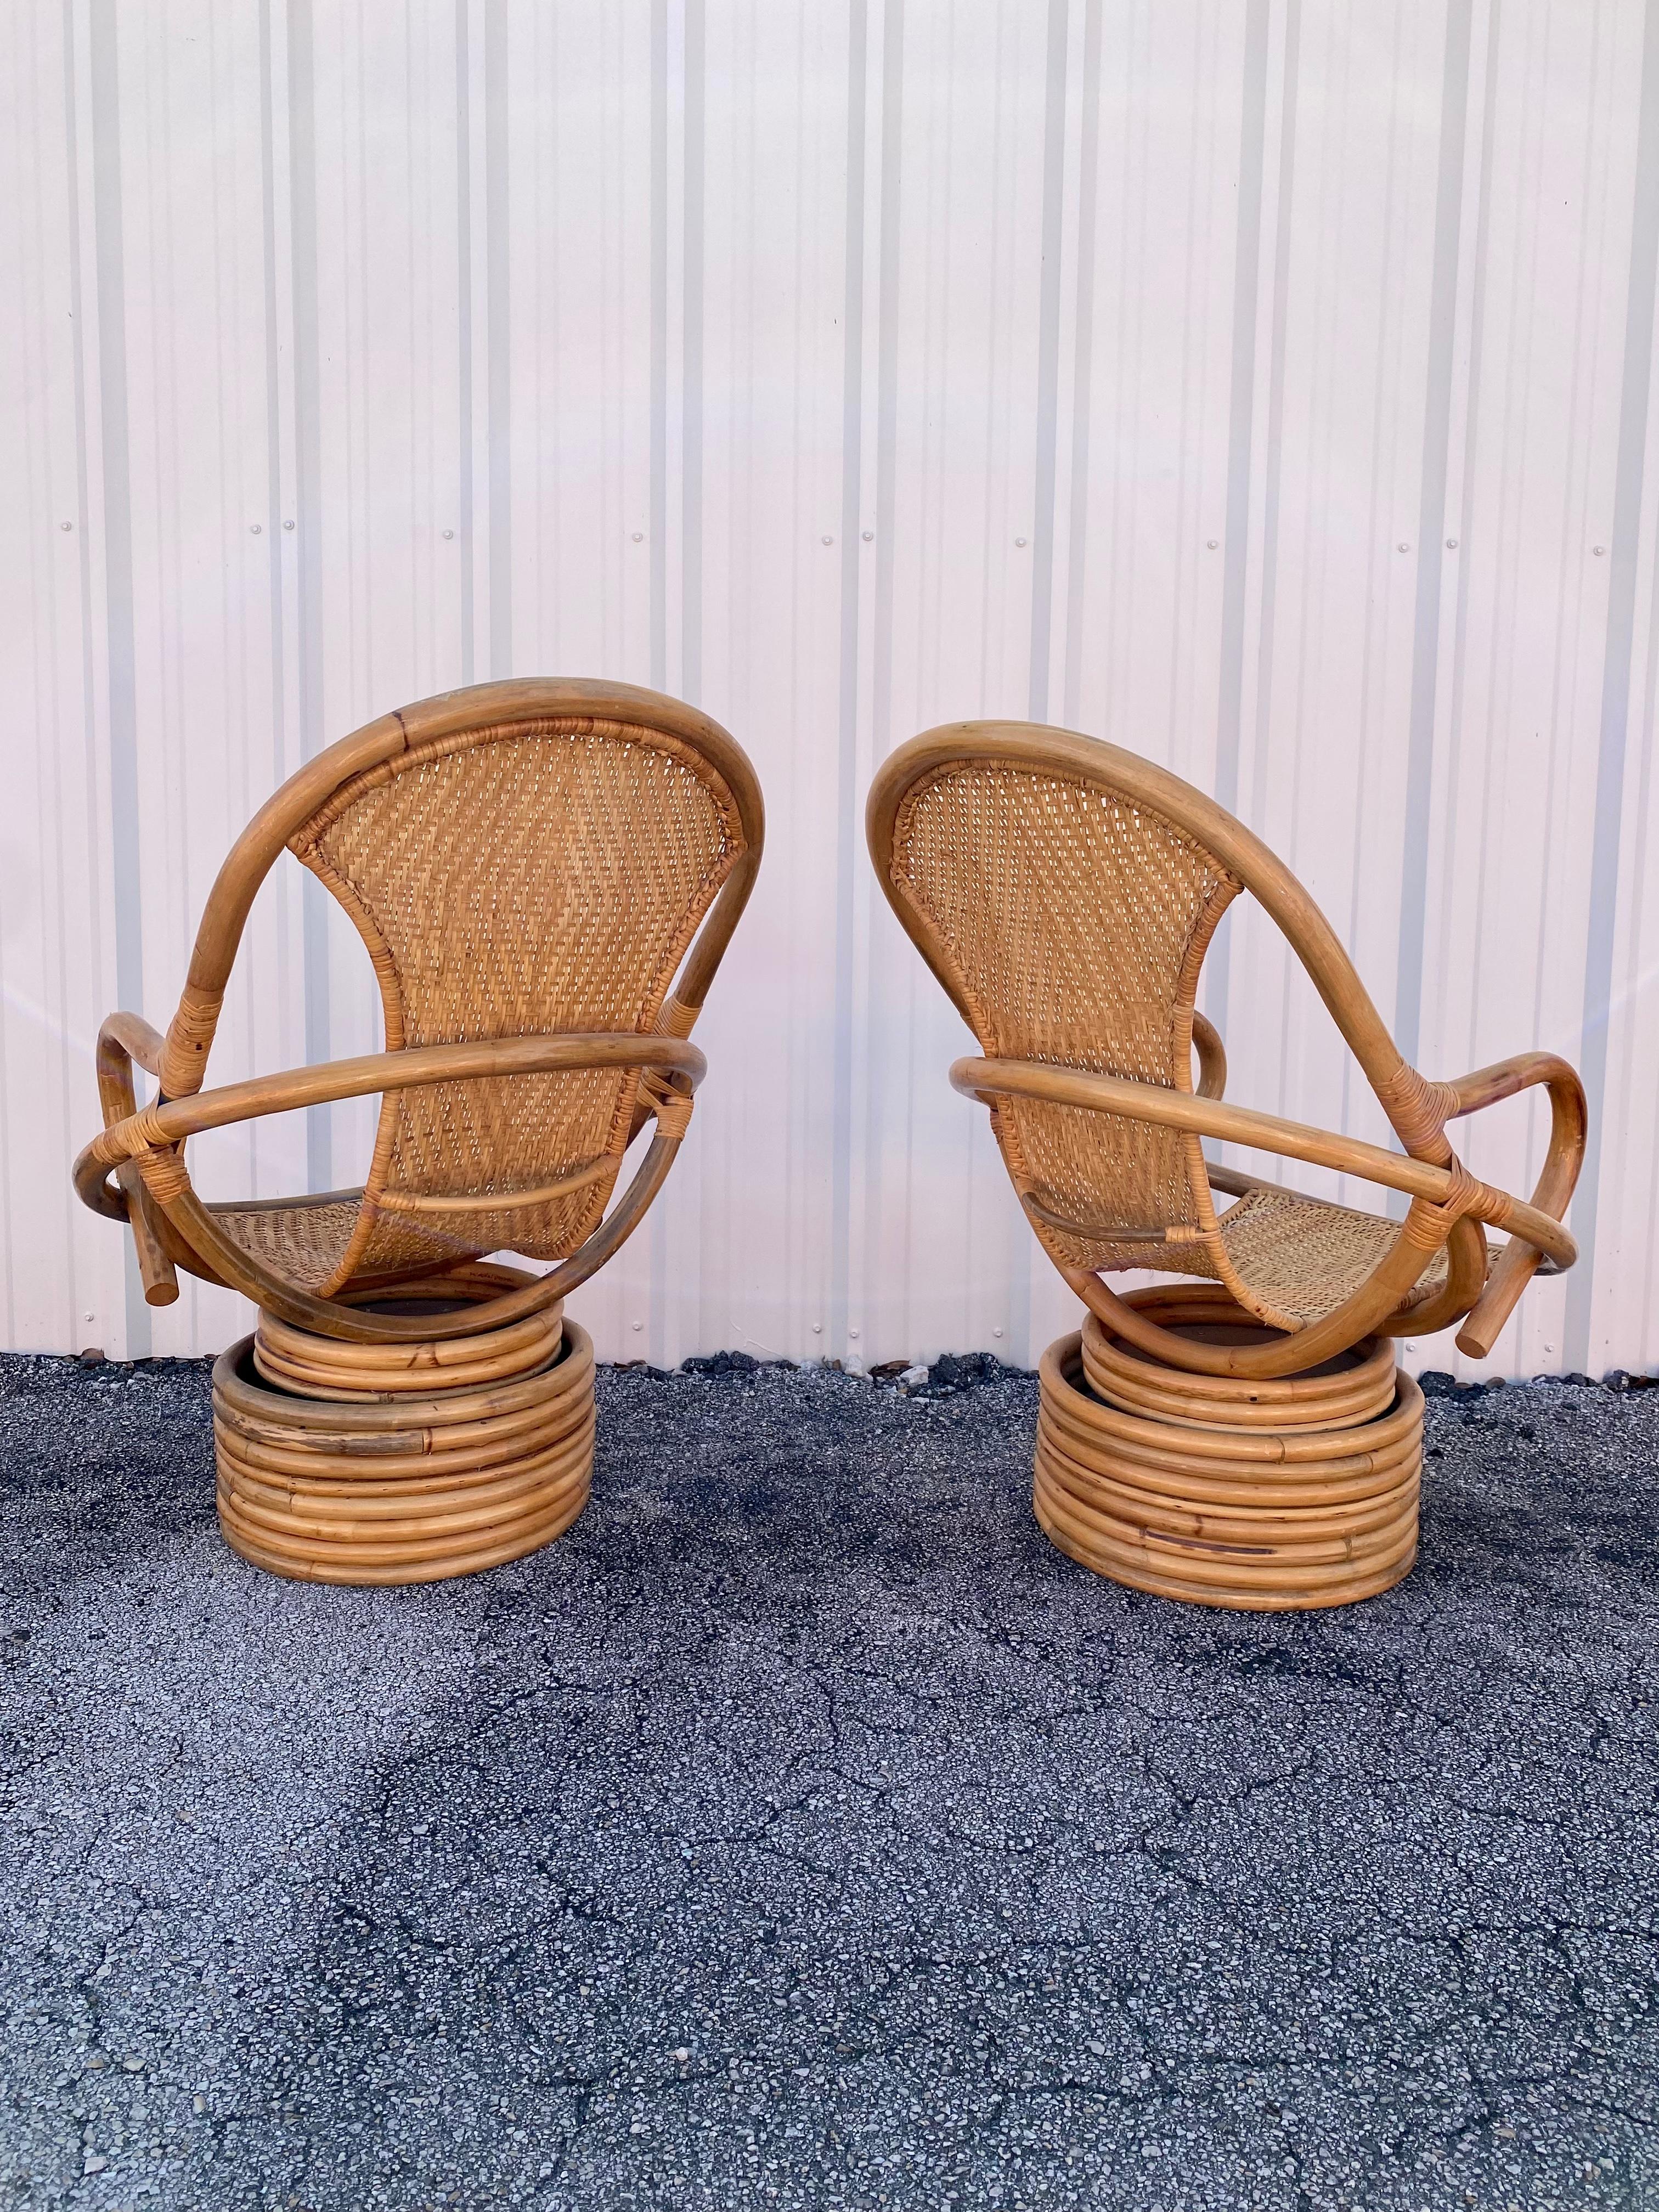 Bohemian 1980s Rattan Coastal Sculptural Swivel Chairs, set of 2 For Sale